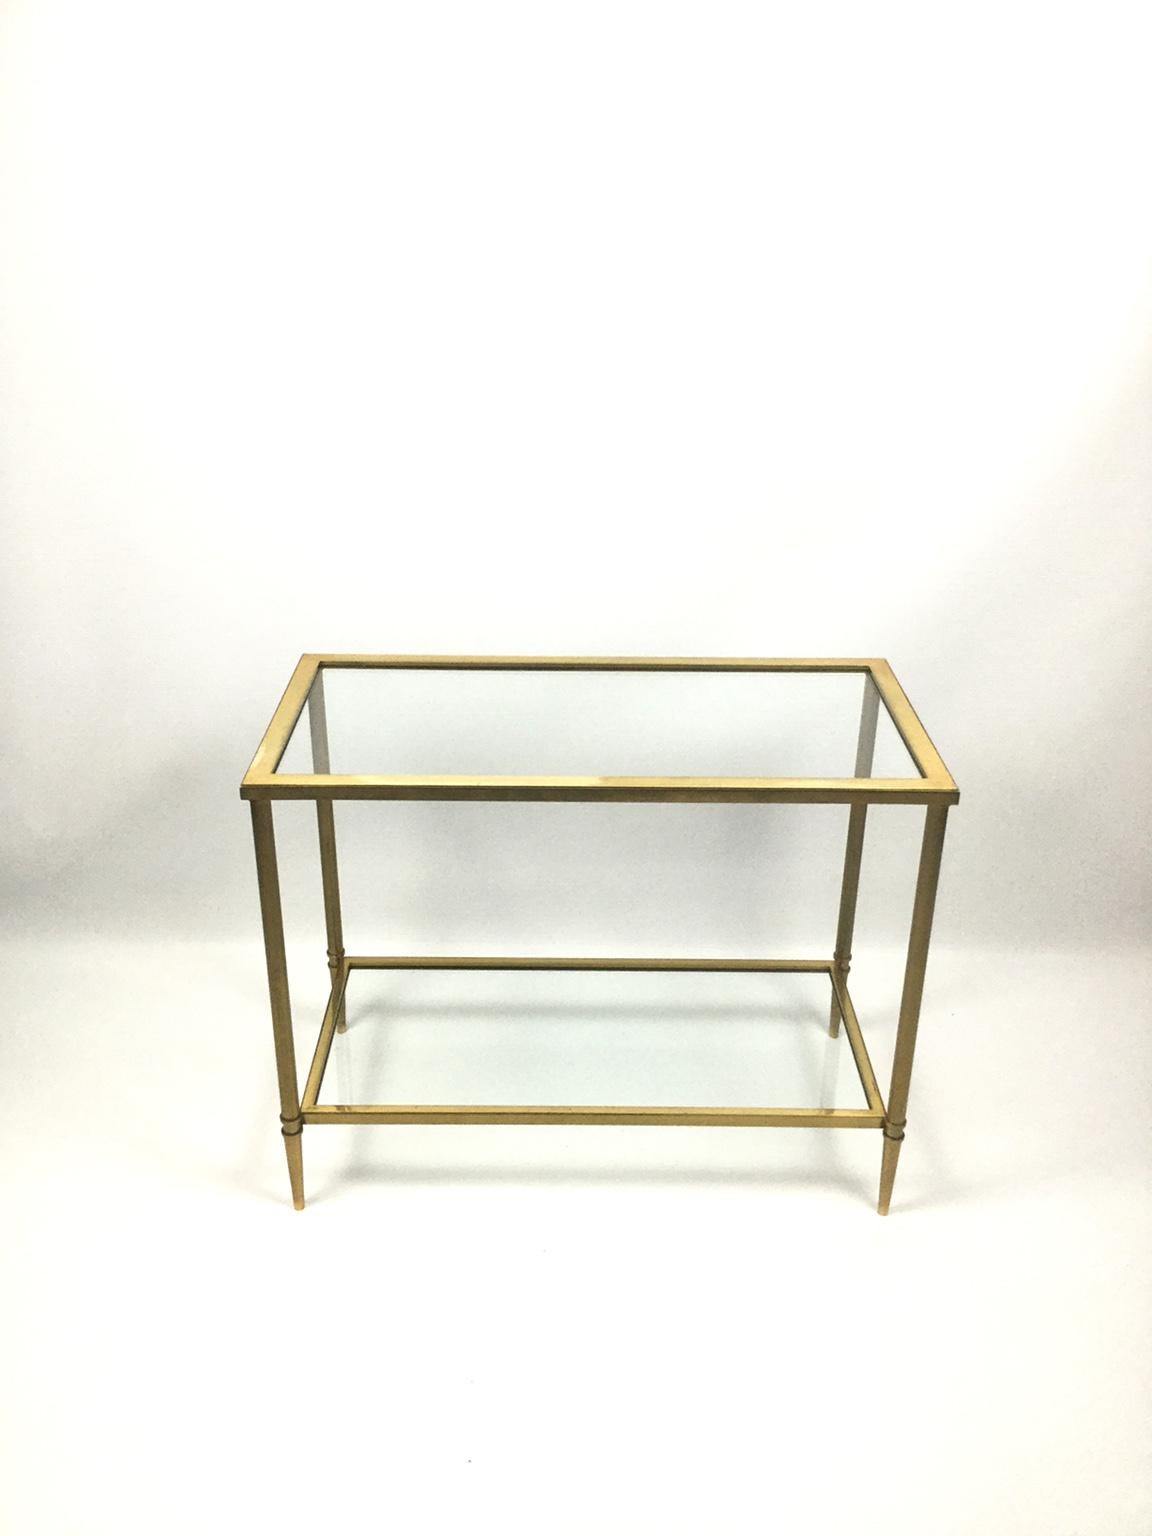 Pair of Brass Console Tables Attributed to Maison Jansen, France, 1970s (Messing)